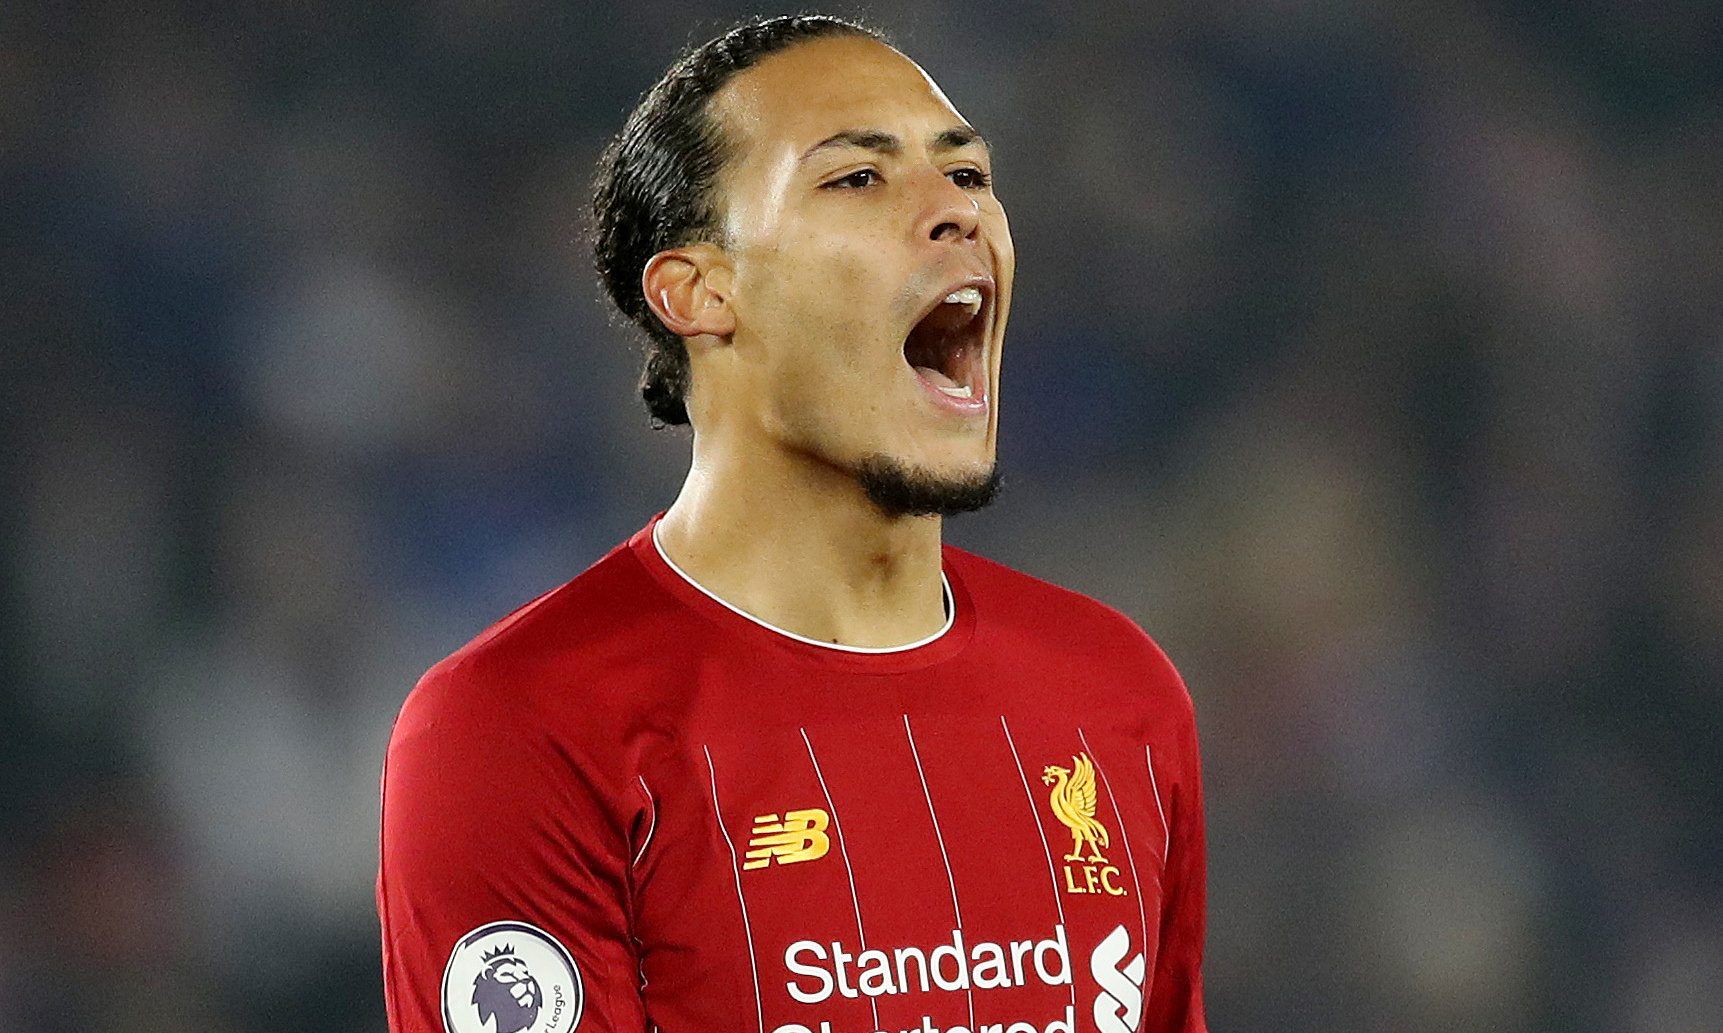 Soccer Football - Premier League - Leicester City v Liverpool - King Power Stadium, Leicester, Britain - December 26, 2019  Liverpool's Virgil van Dijk reacts    Action Images via Reuters/Carl Recine  EDITORIAL USE ONLY. No use with unauthorized audio, video, data, fixture lists, club/league logos or 